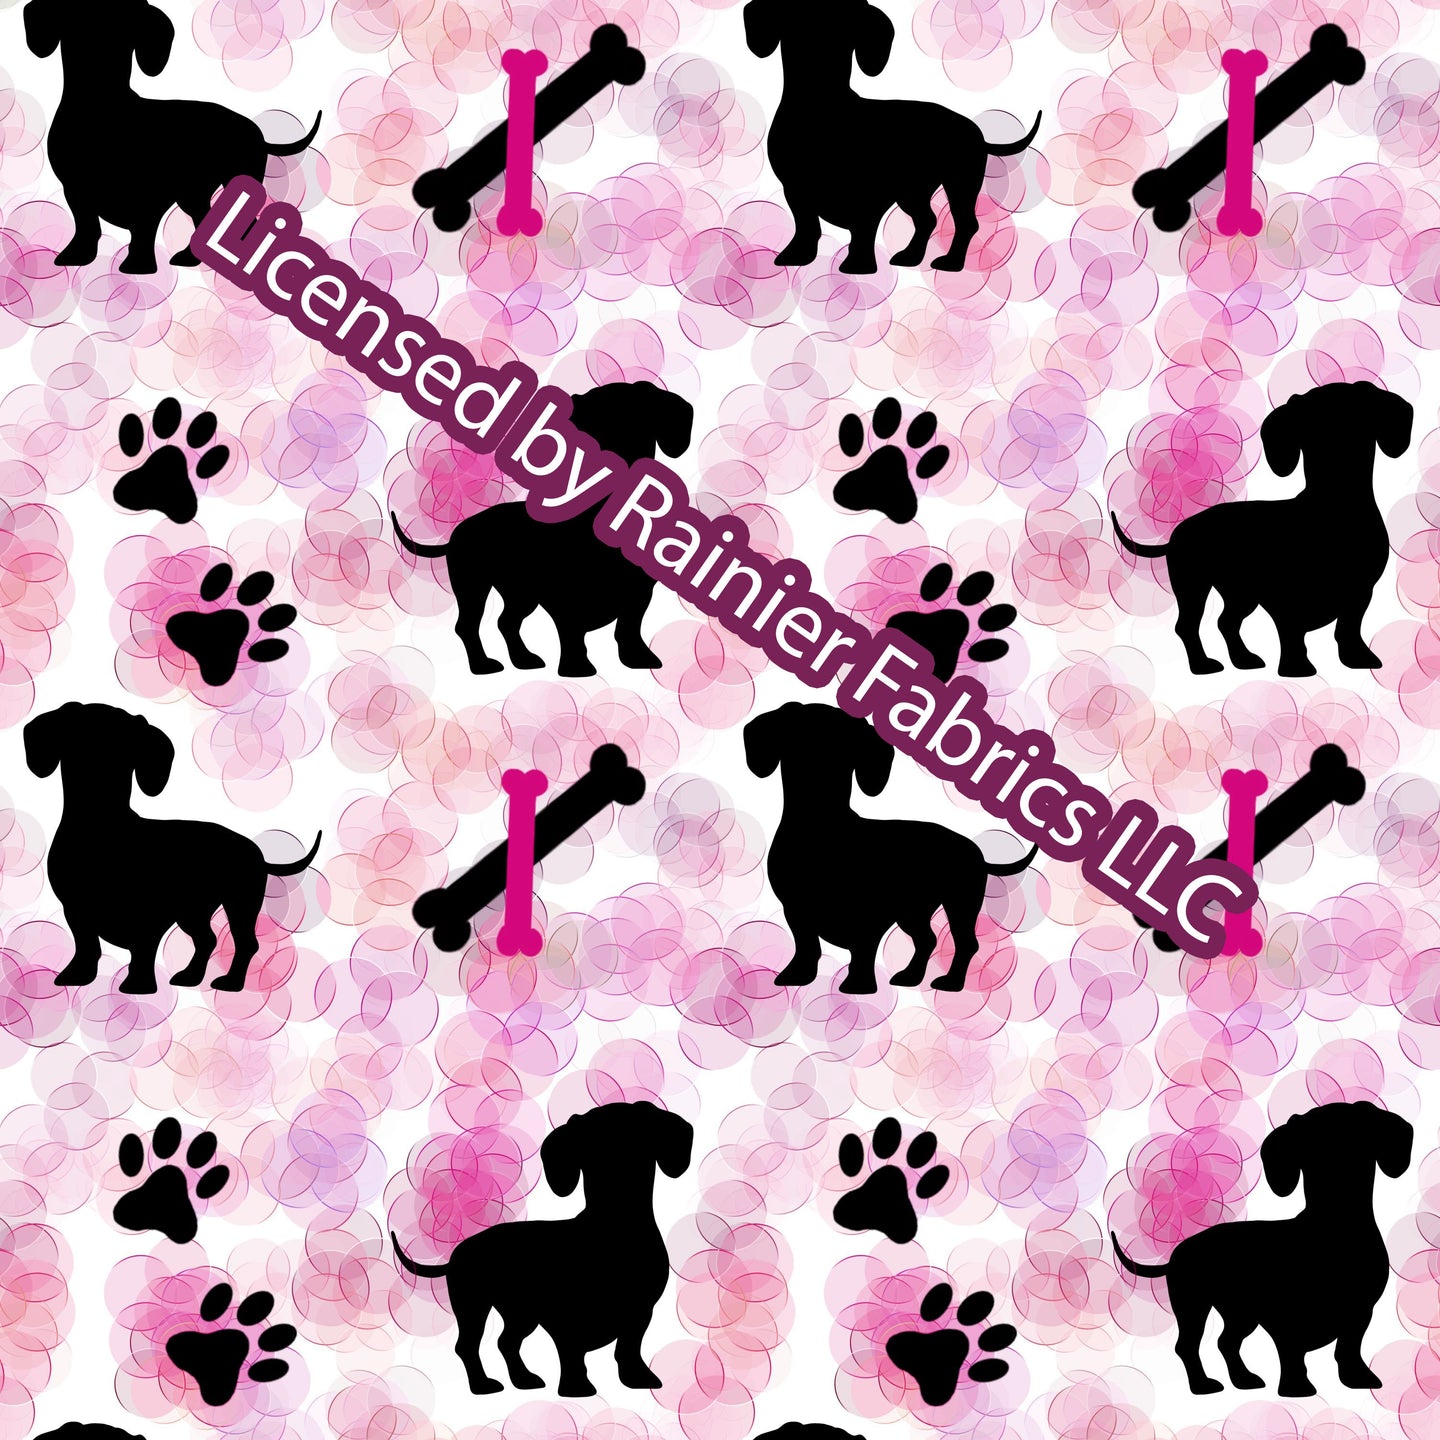 Dachshunds (dogs) in lots of colors - by Nina  - Order by half yard - See below for instructions on ordering and base fabrics